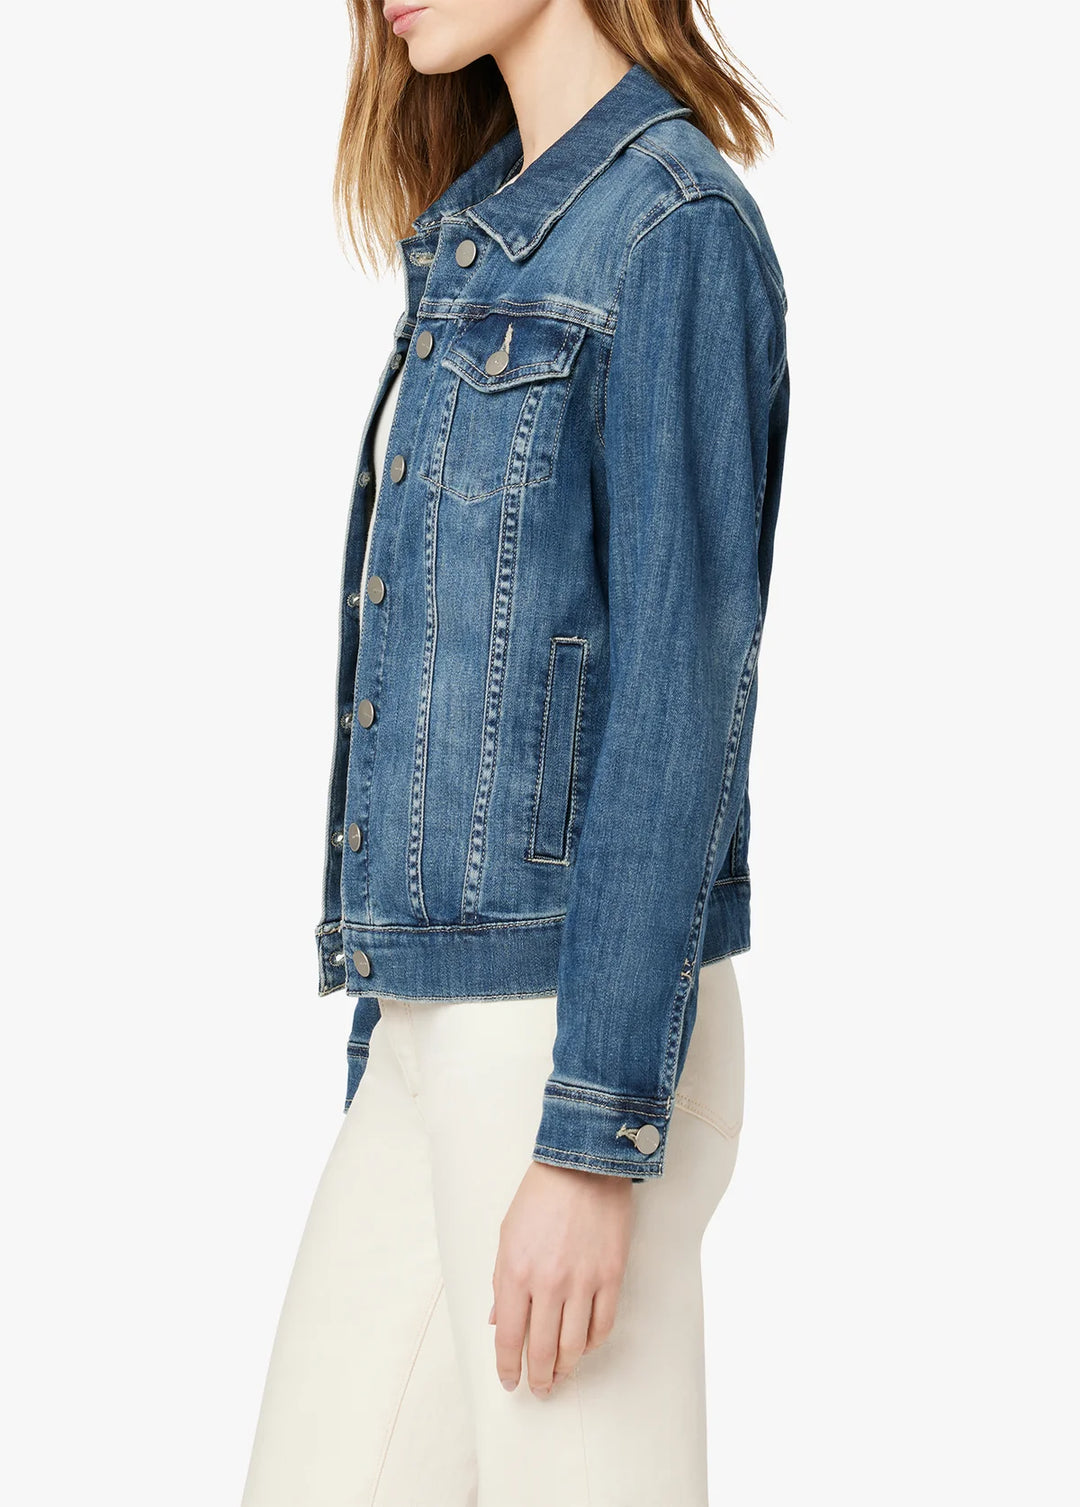 THE RELAXED DENIM JACKET